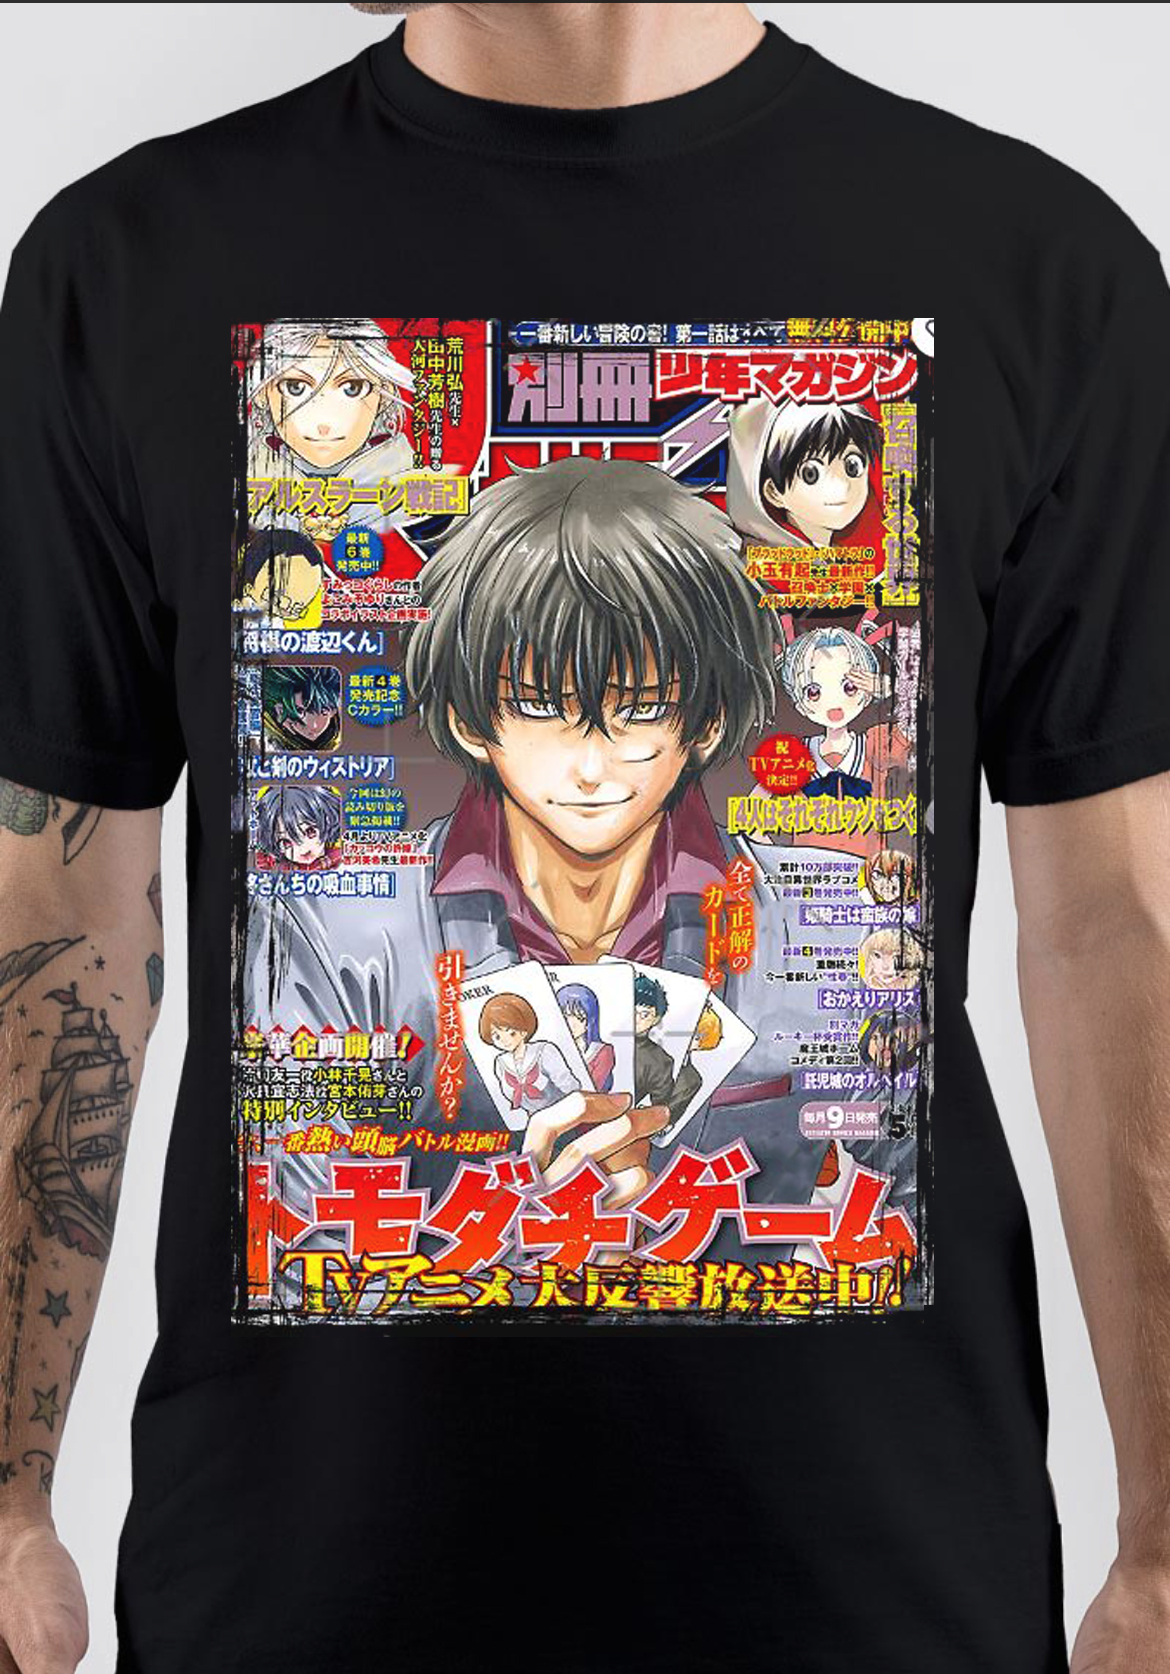 Tomodachi Game Essential T-Shirt for Sale by Flo-akp